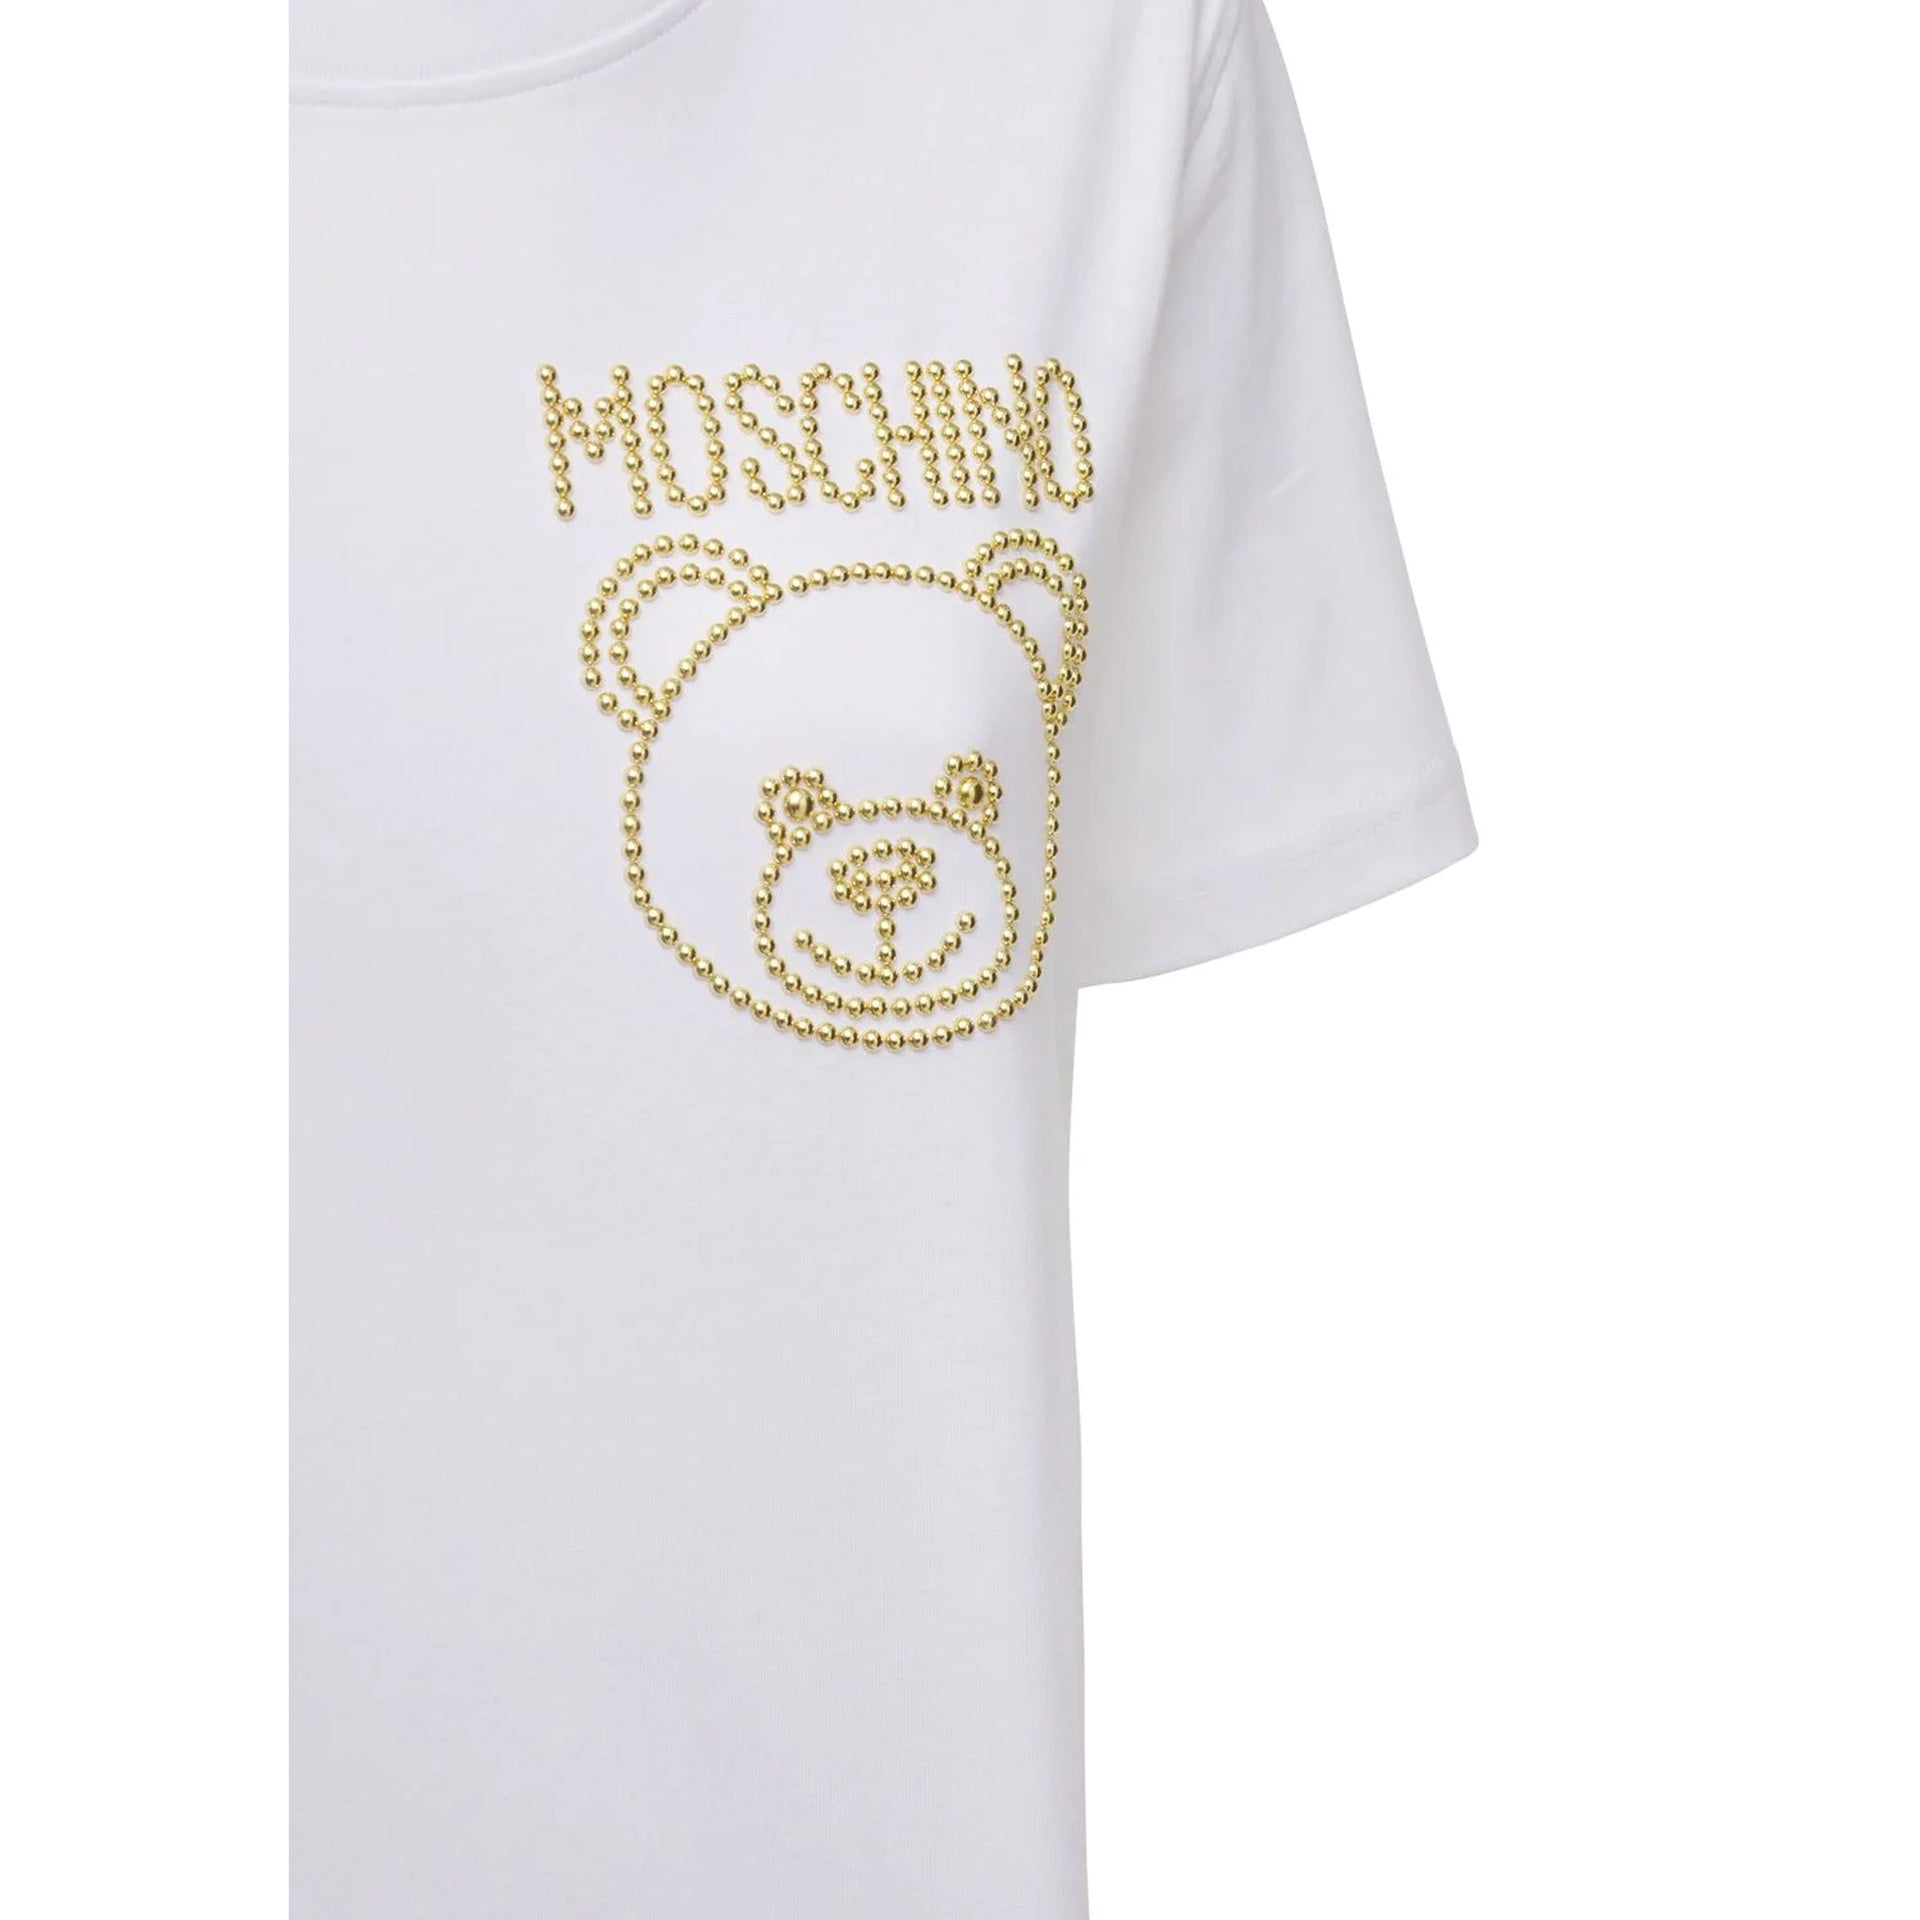 MOSCHINO-COUTURE-OUTLET-SALE-Moschino-Couture-Cotton-Logo-T-Shirt-Shirts-ARCHIVE-COLLECTION-3.jpg